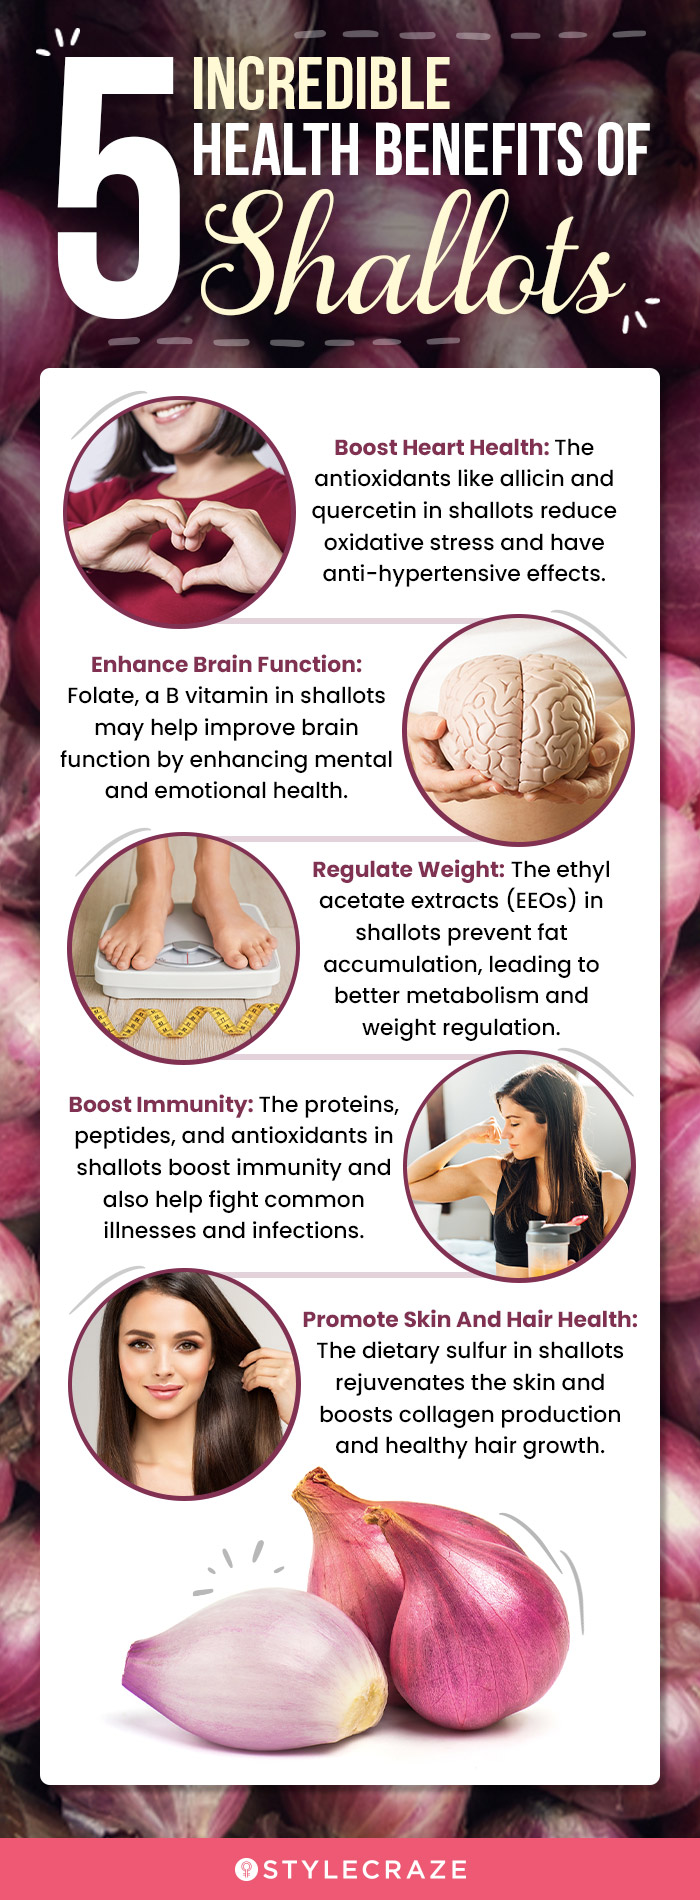 5 incredible health benefits of shallots (infographic)